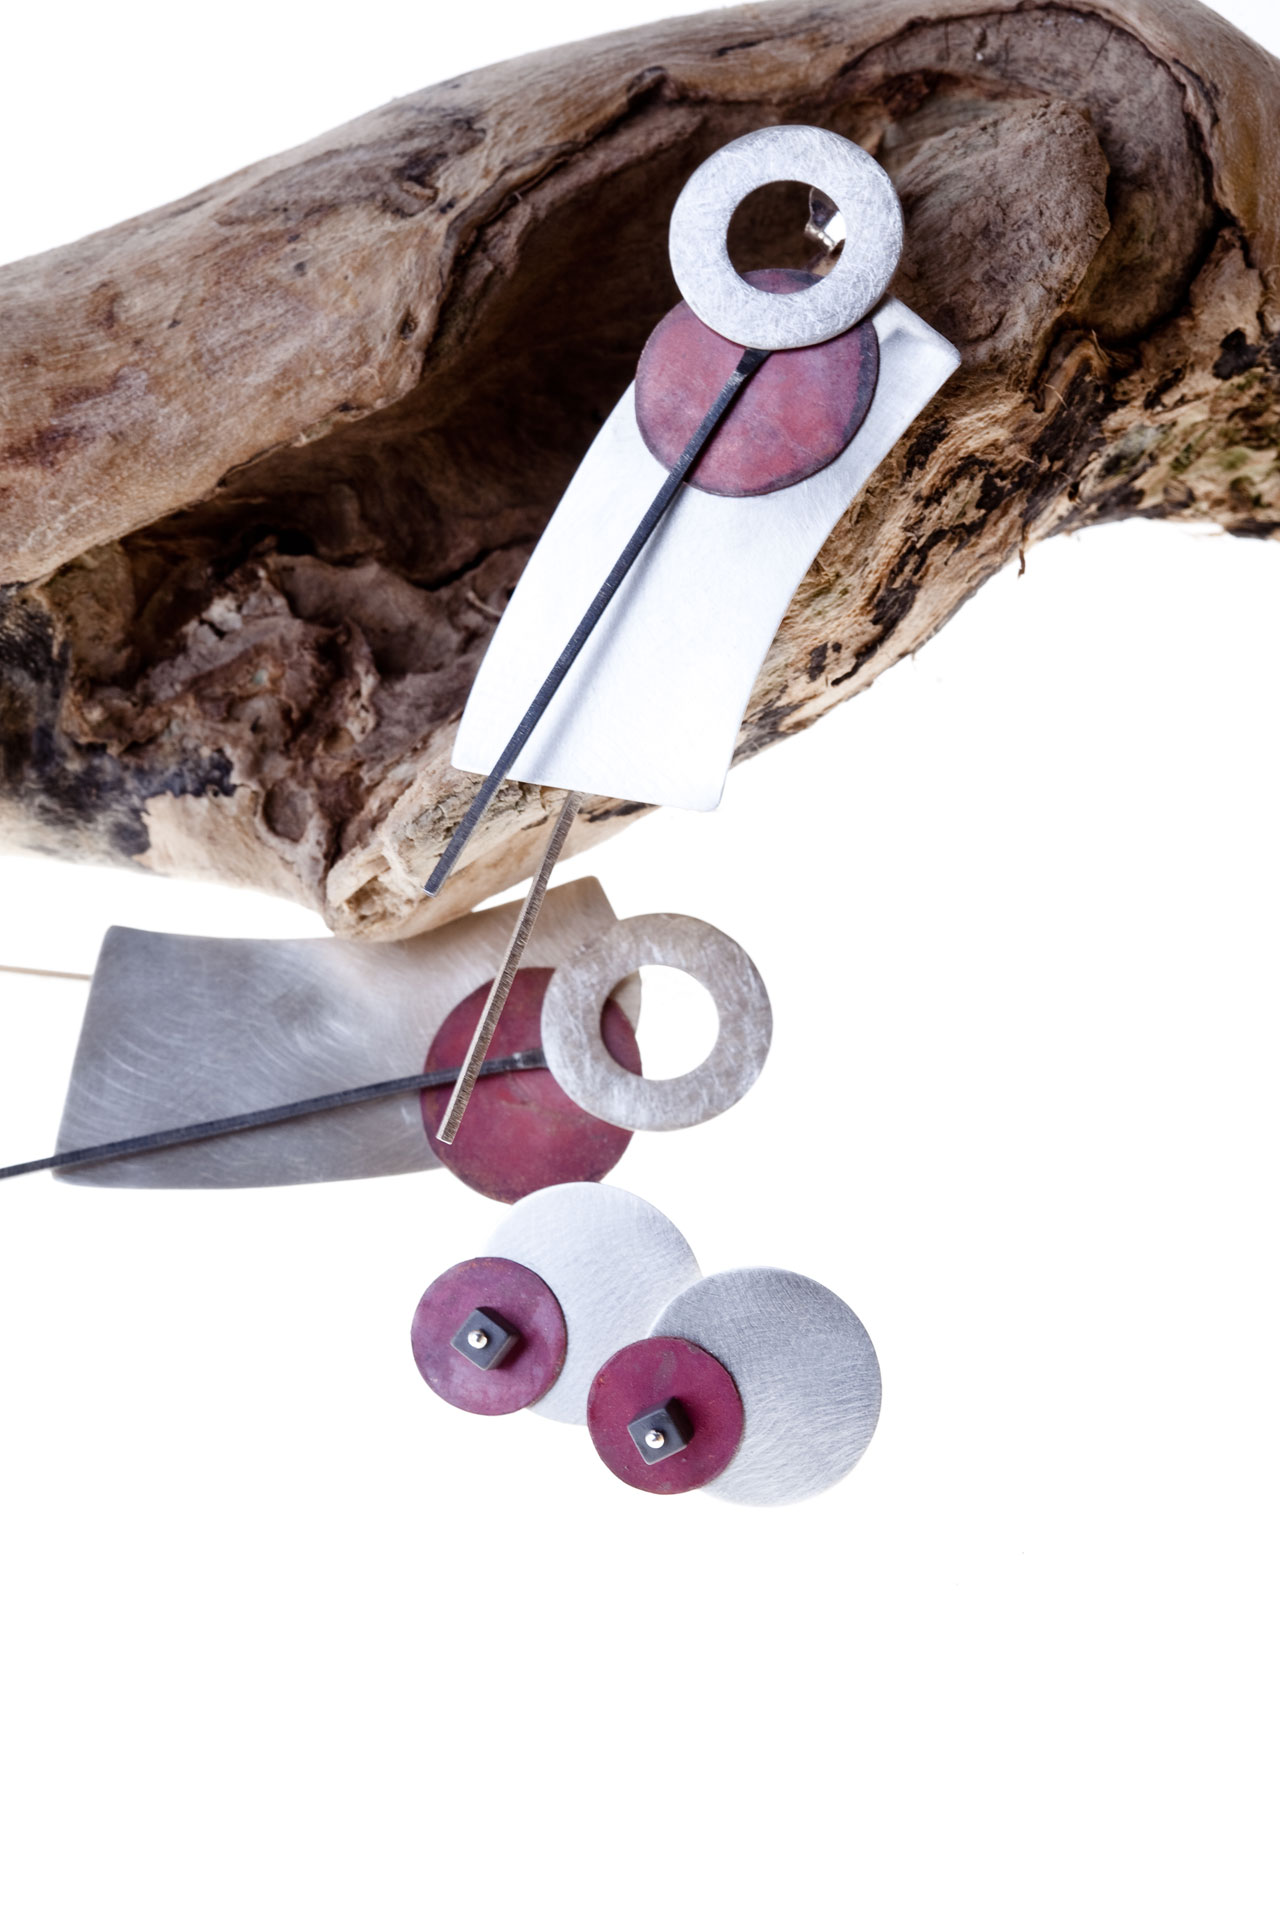 Aines handmade Jewellery - Round and Copper Collection - Silver and Copper earrings.